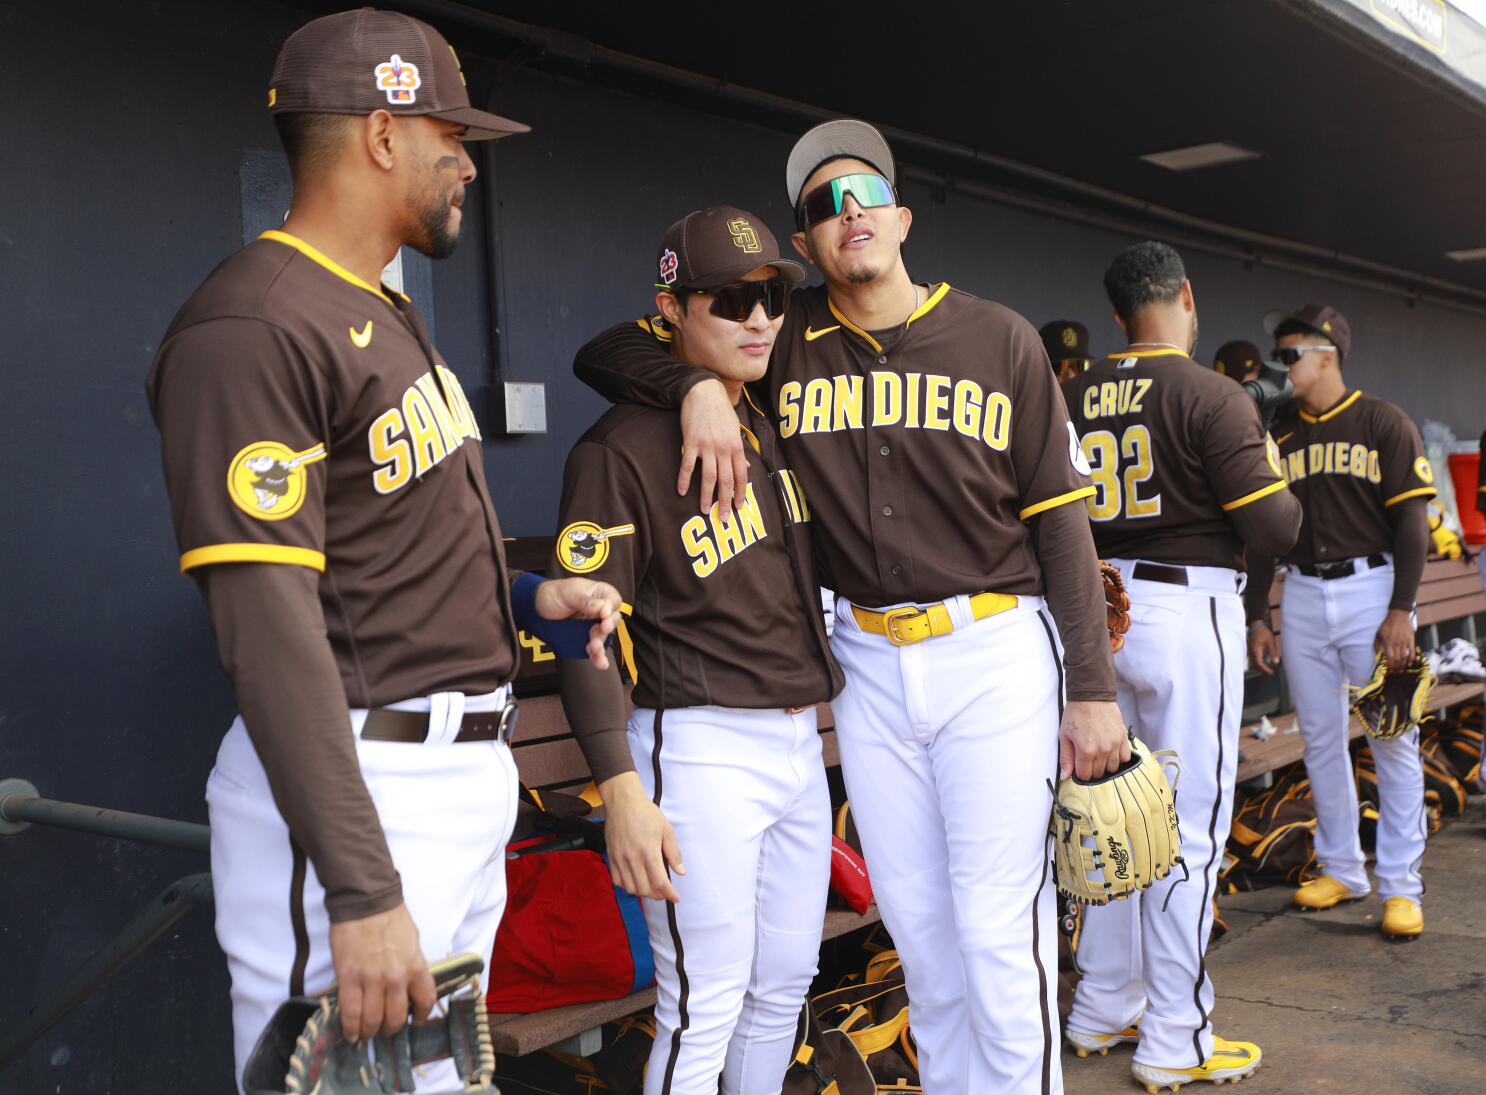 Padres, with Expectations High, Hope 'Special Things' in Store As